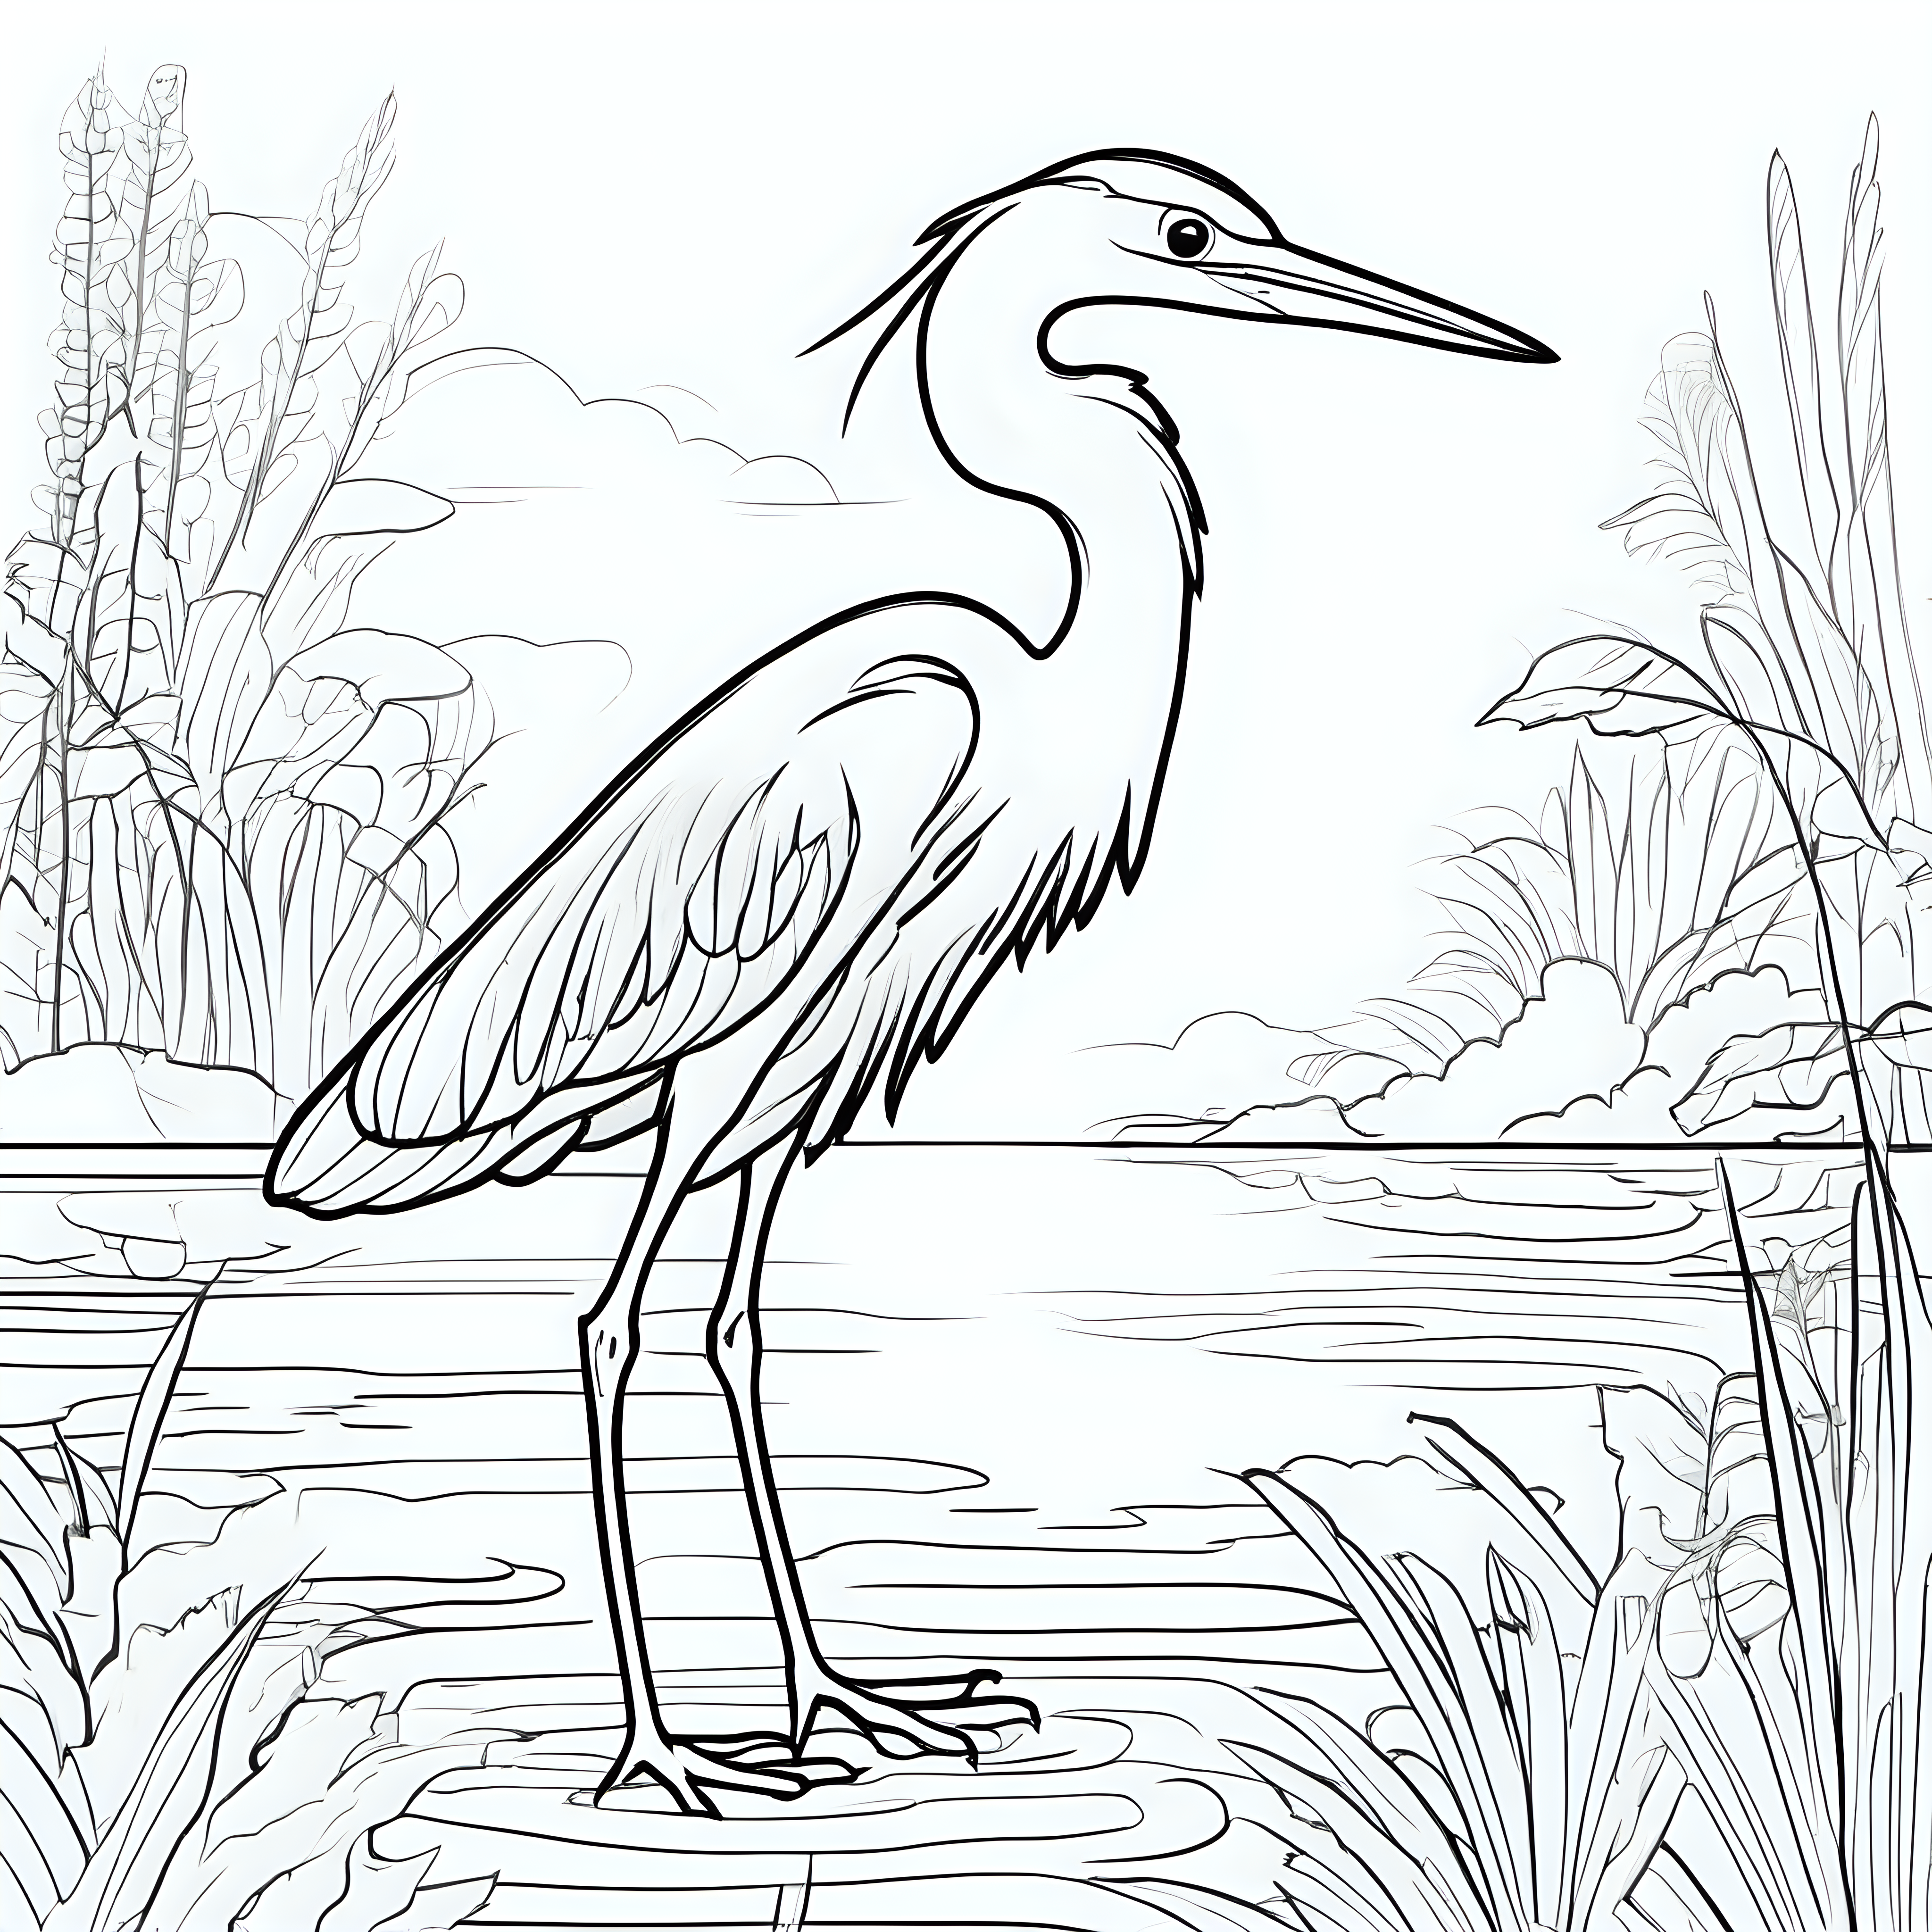 draw a cute heron with only the outline